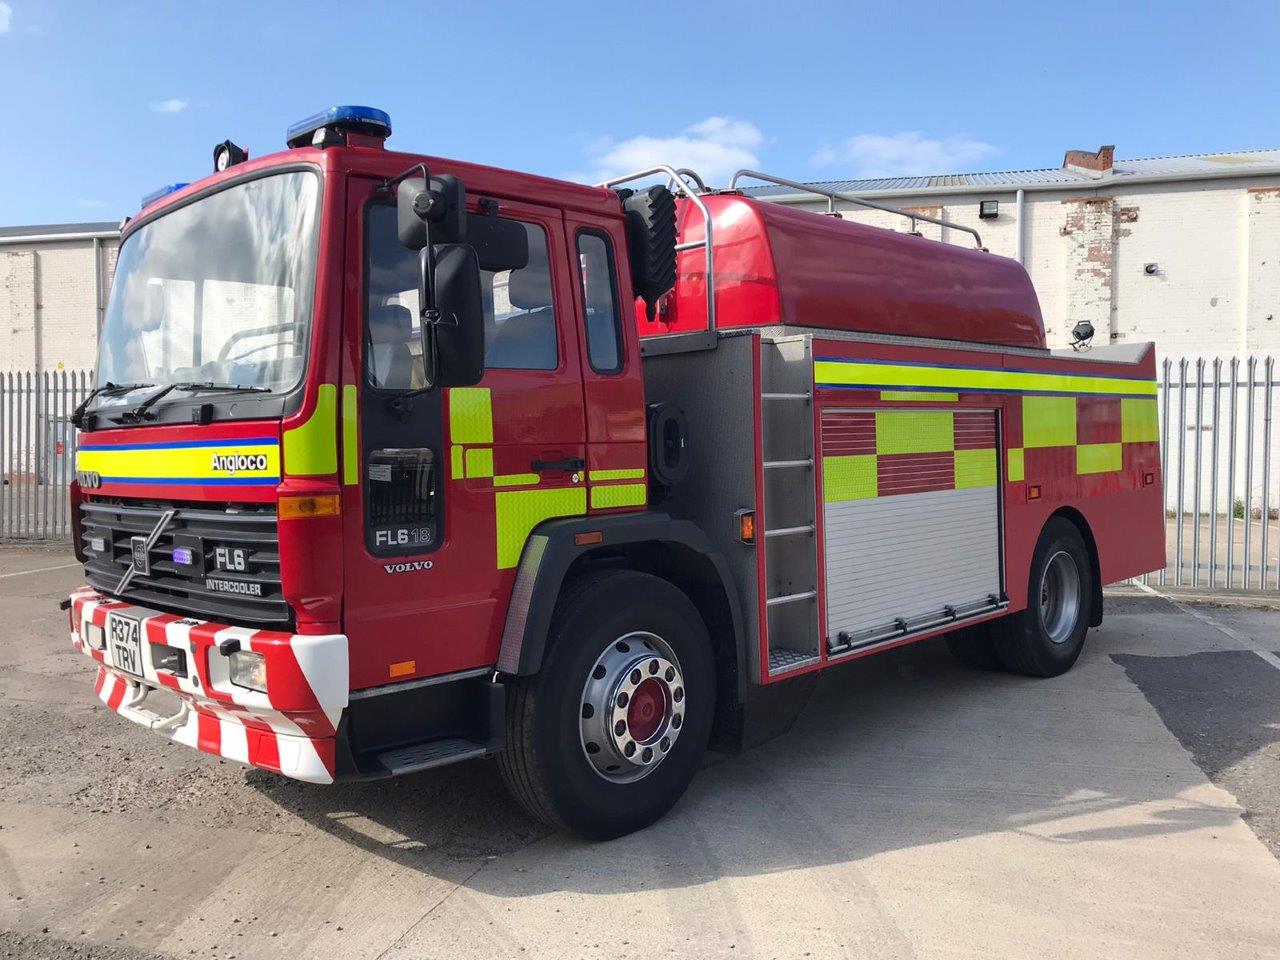 VOLVO FL6 250 Emergency Water Tanker (Fire Engine) - ex military vehicles for sale, mod surplus